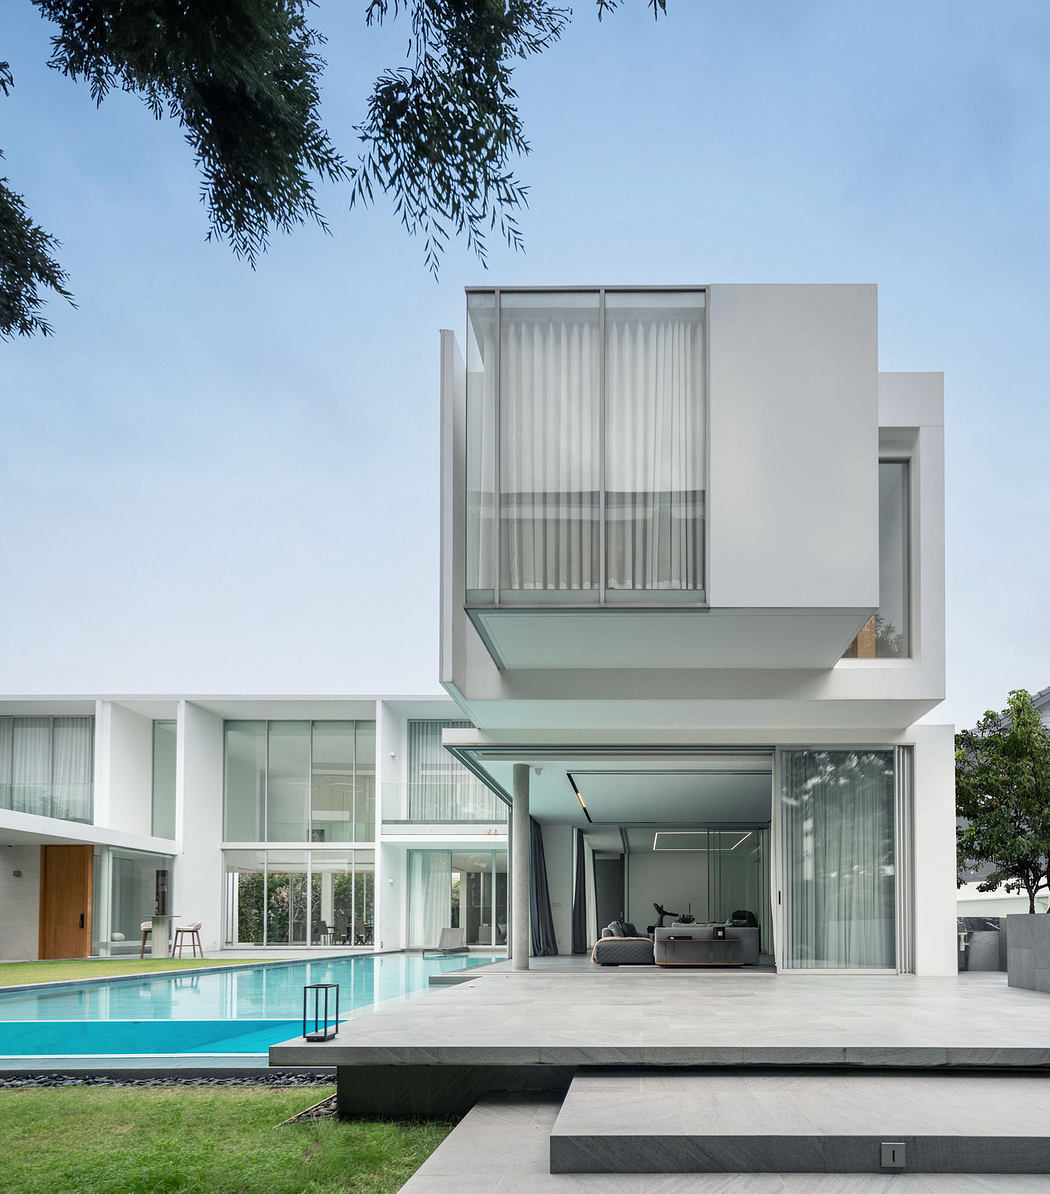 Modern house with geometric design, large windows, and a pool.